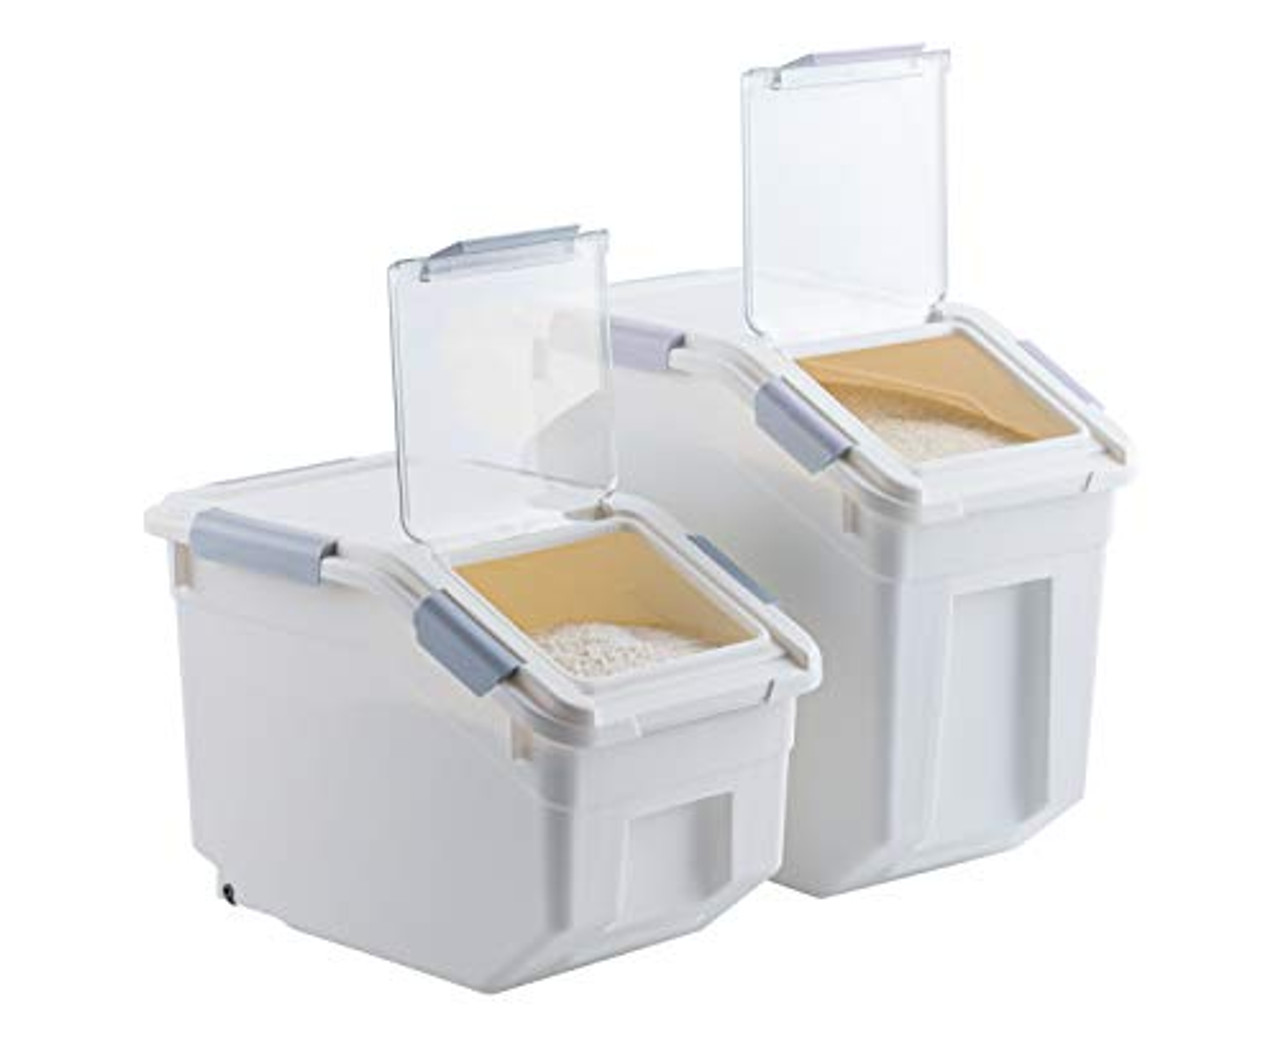 Large Food Storage Container  20-lb (11-L) Dry Food, Flour, Rice